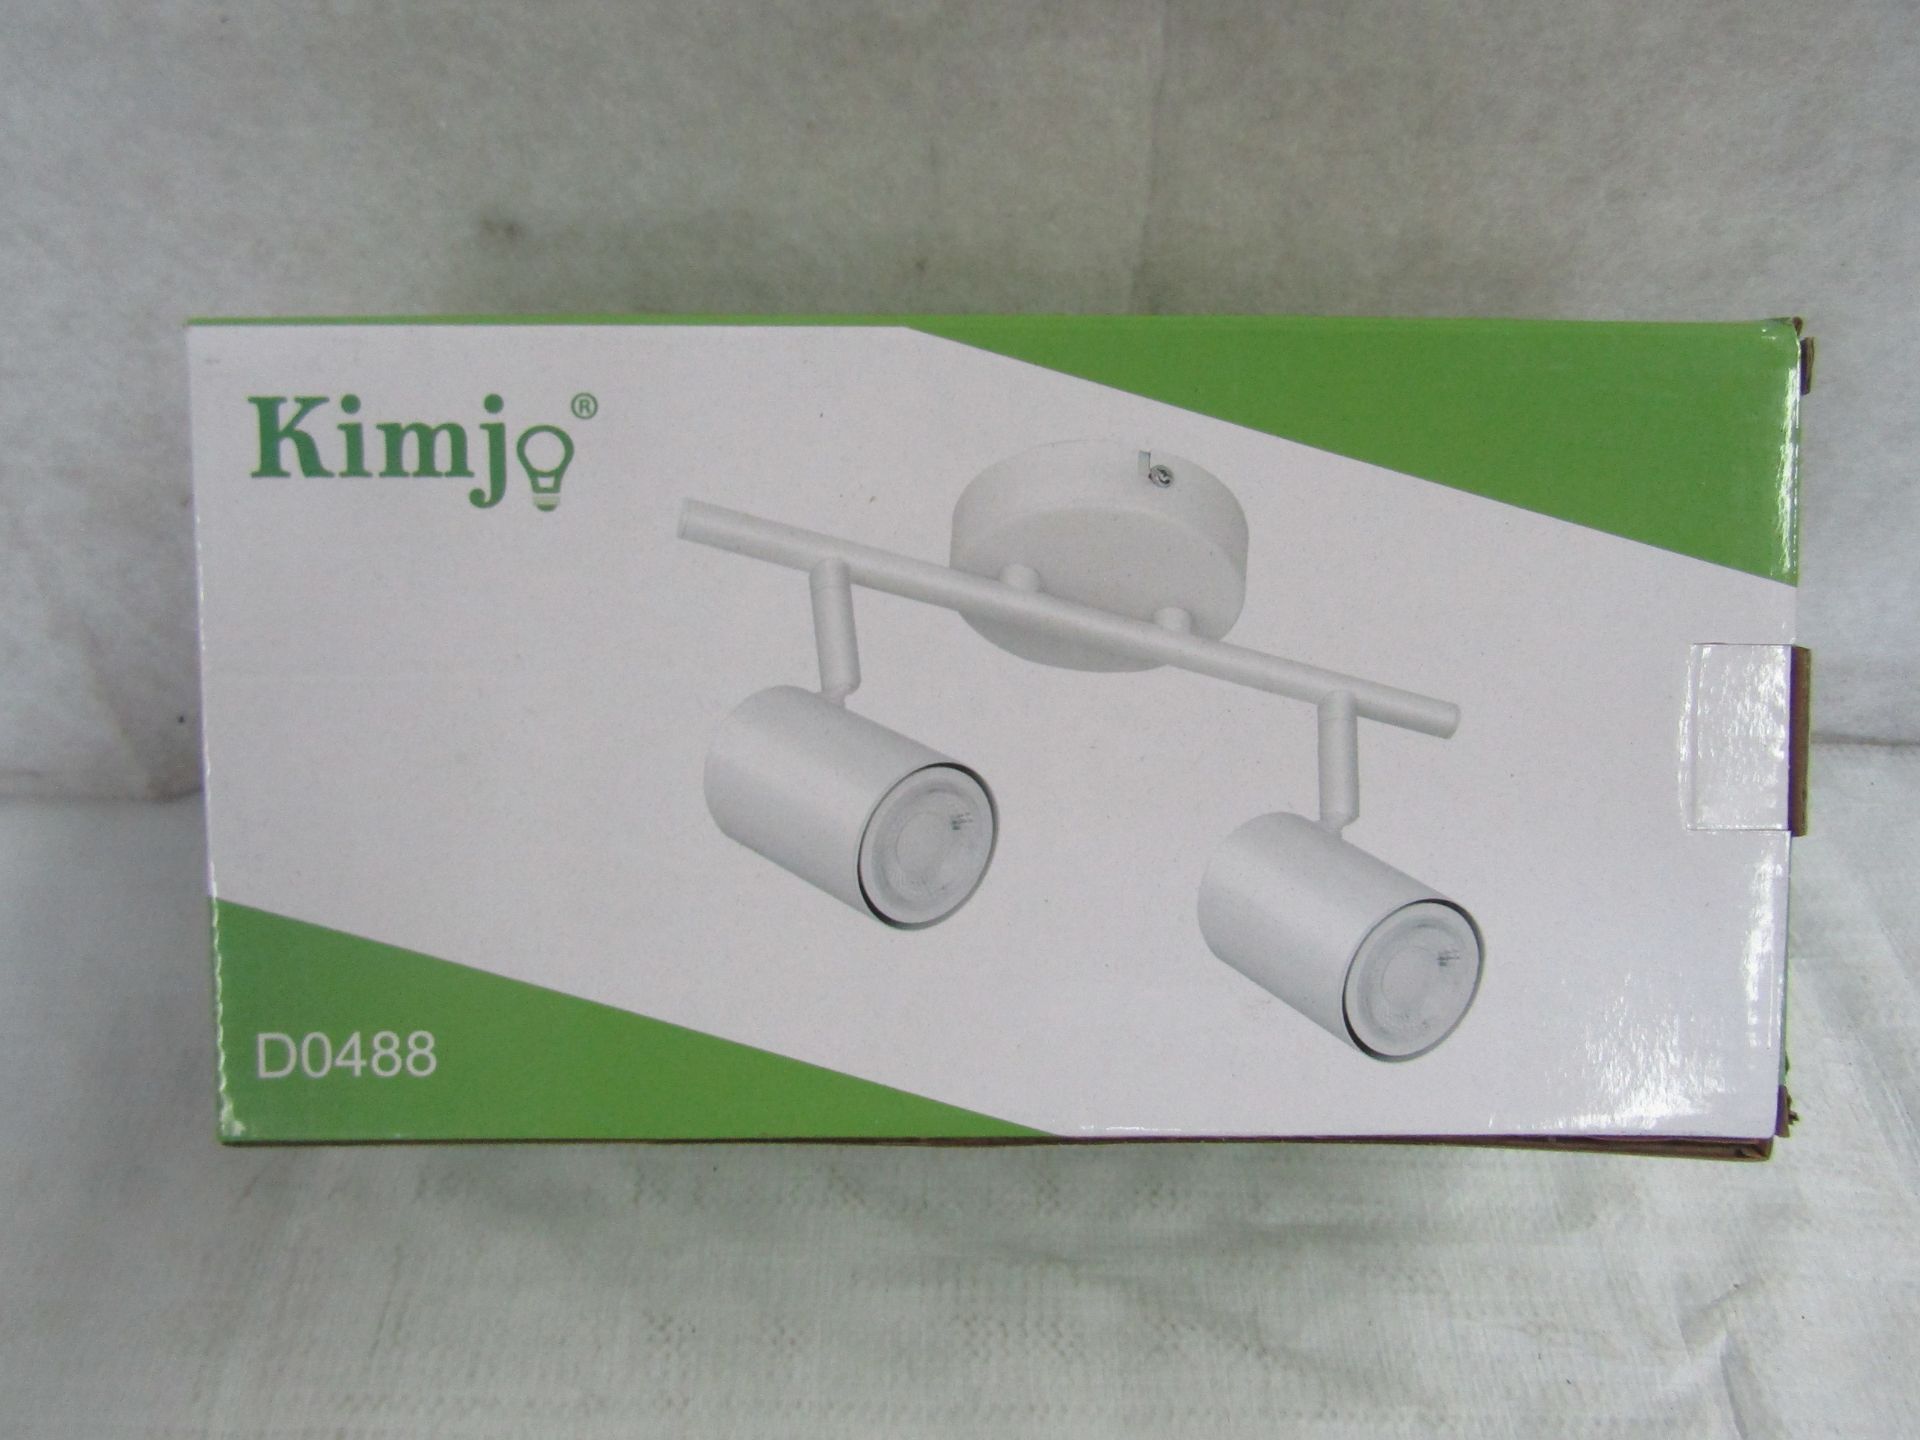 Kimjo Ceiling Light, Model (D0488) 2 Way, Rotating, Black, Unchecked & Boxed. RRP £19.